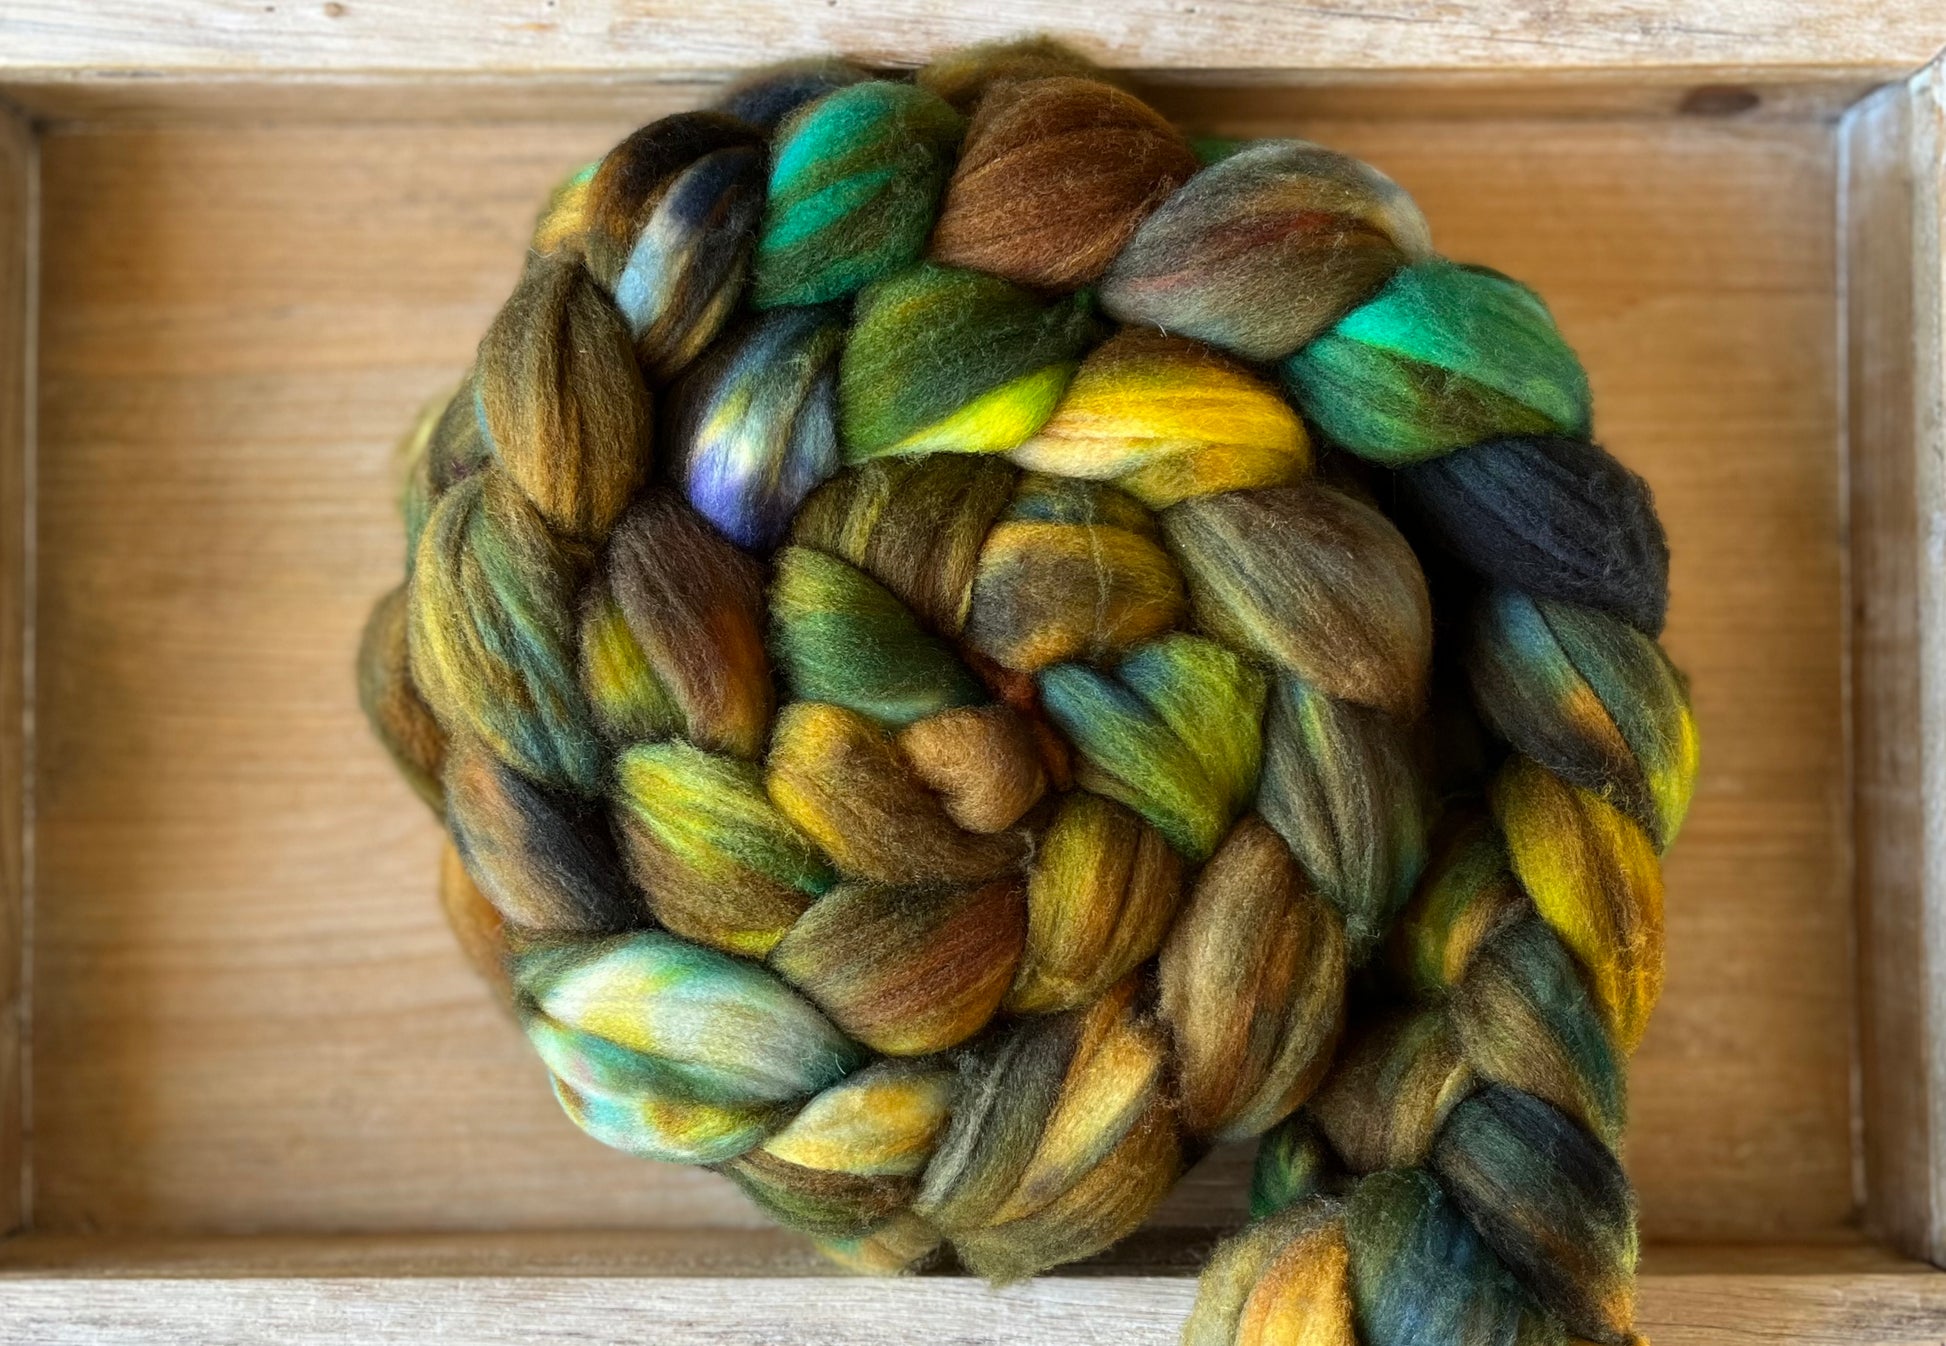 100 grams of Spinning Fibre - Superwash Merino Wool 22 Micron - Hand Dyed  Combed Top